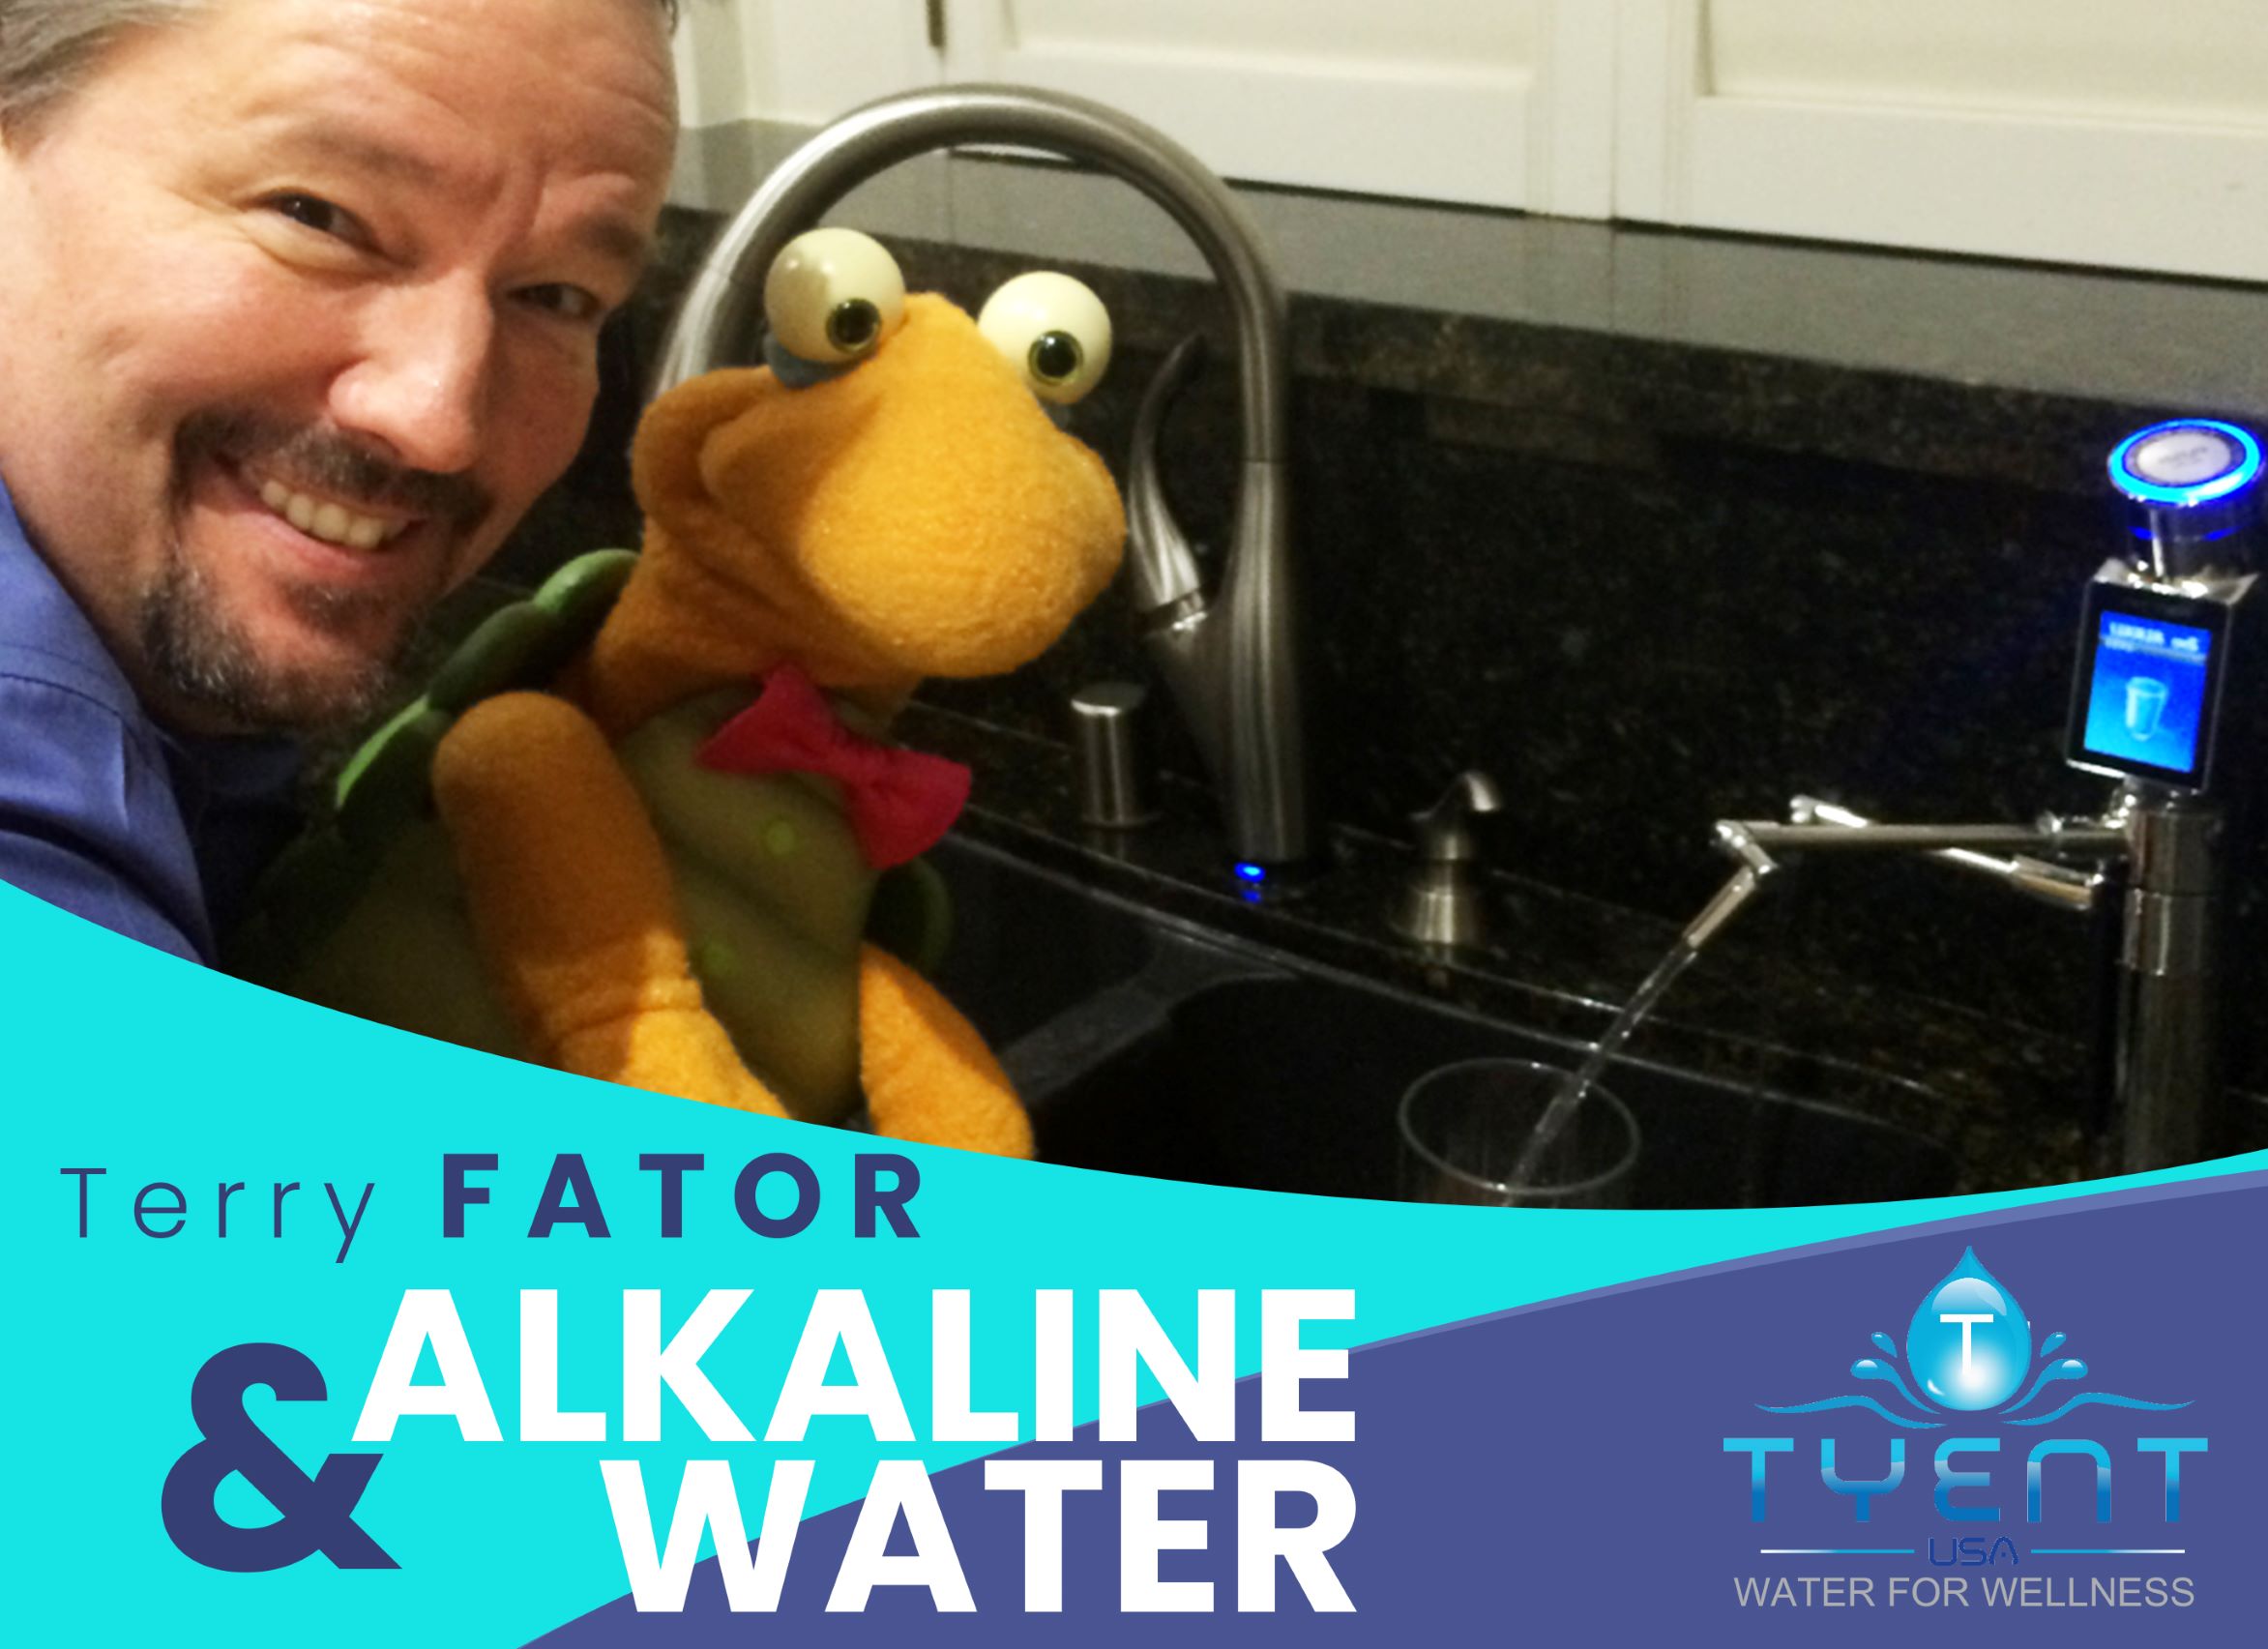 Terry Fator and Alkaline Water